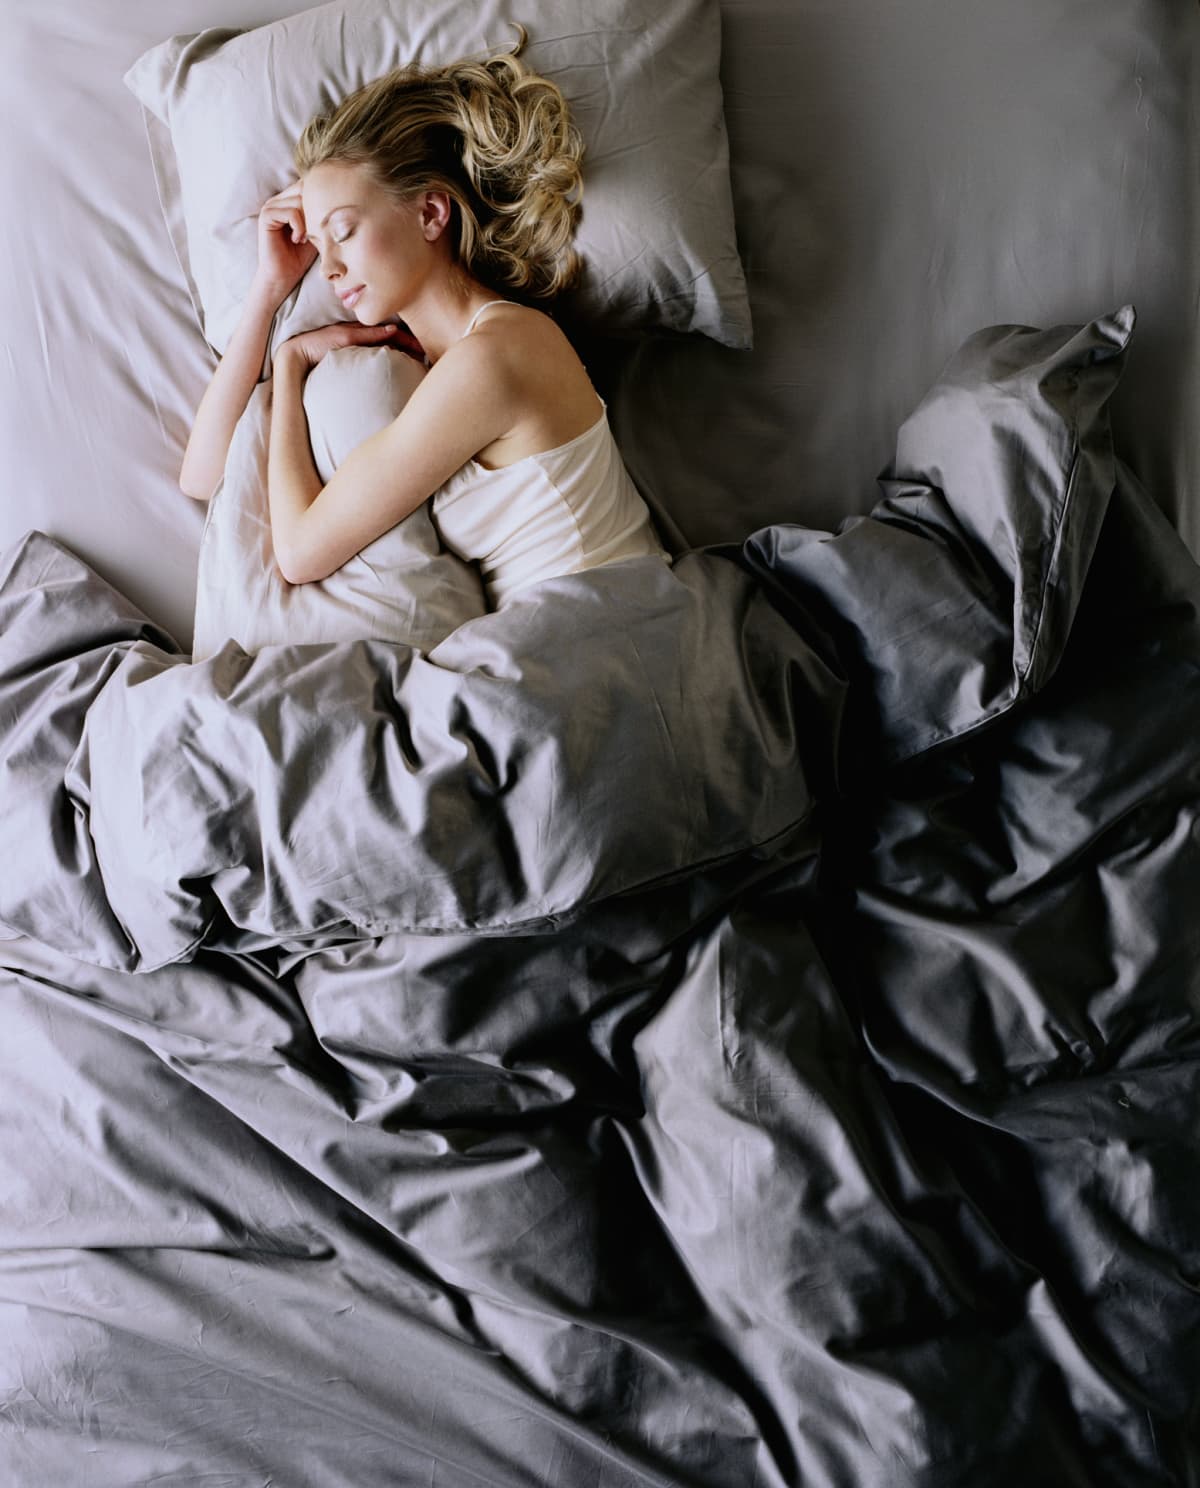 Young woman peacefully sleeping under a duvet